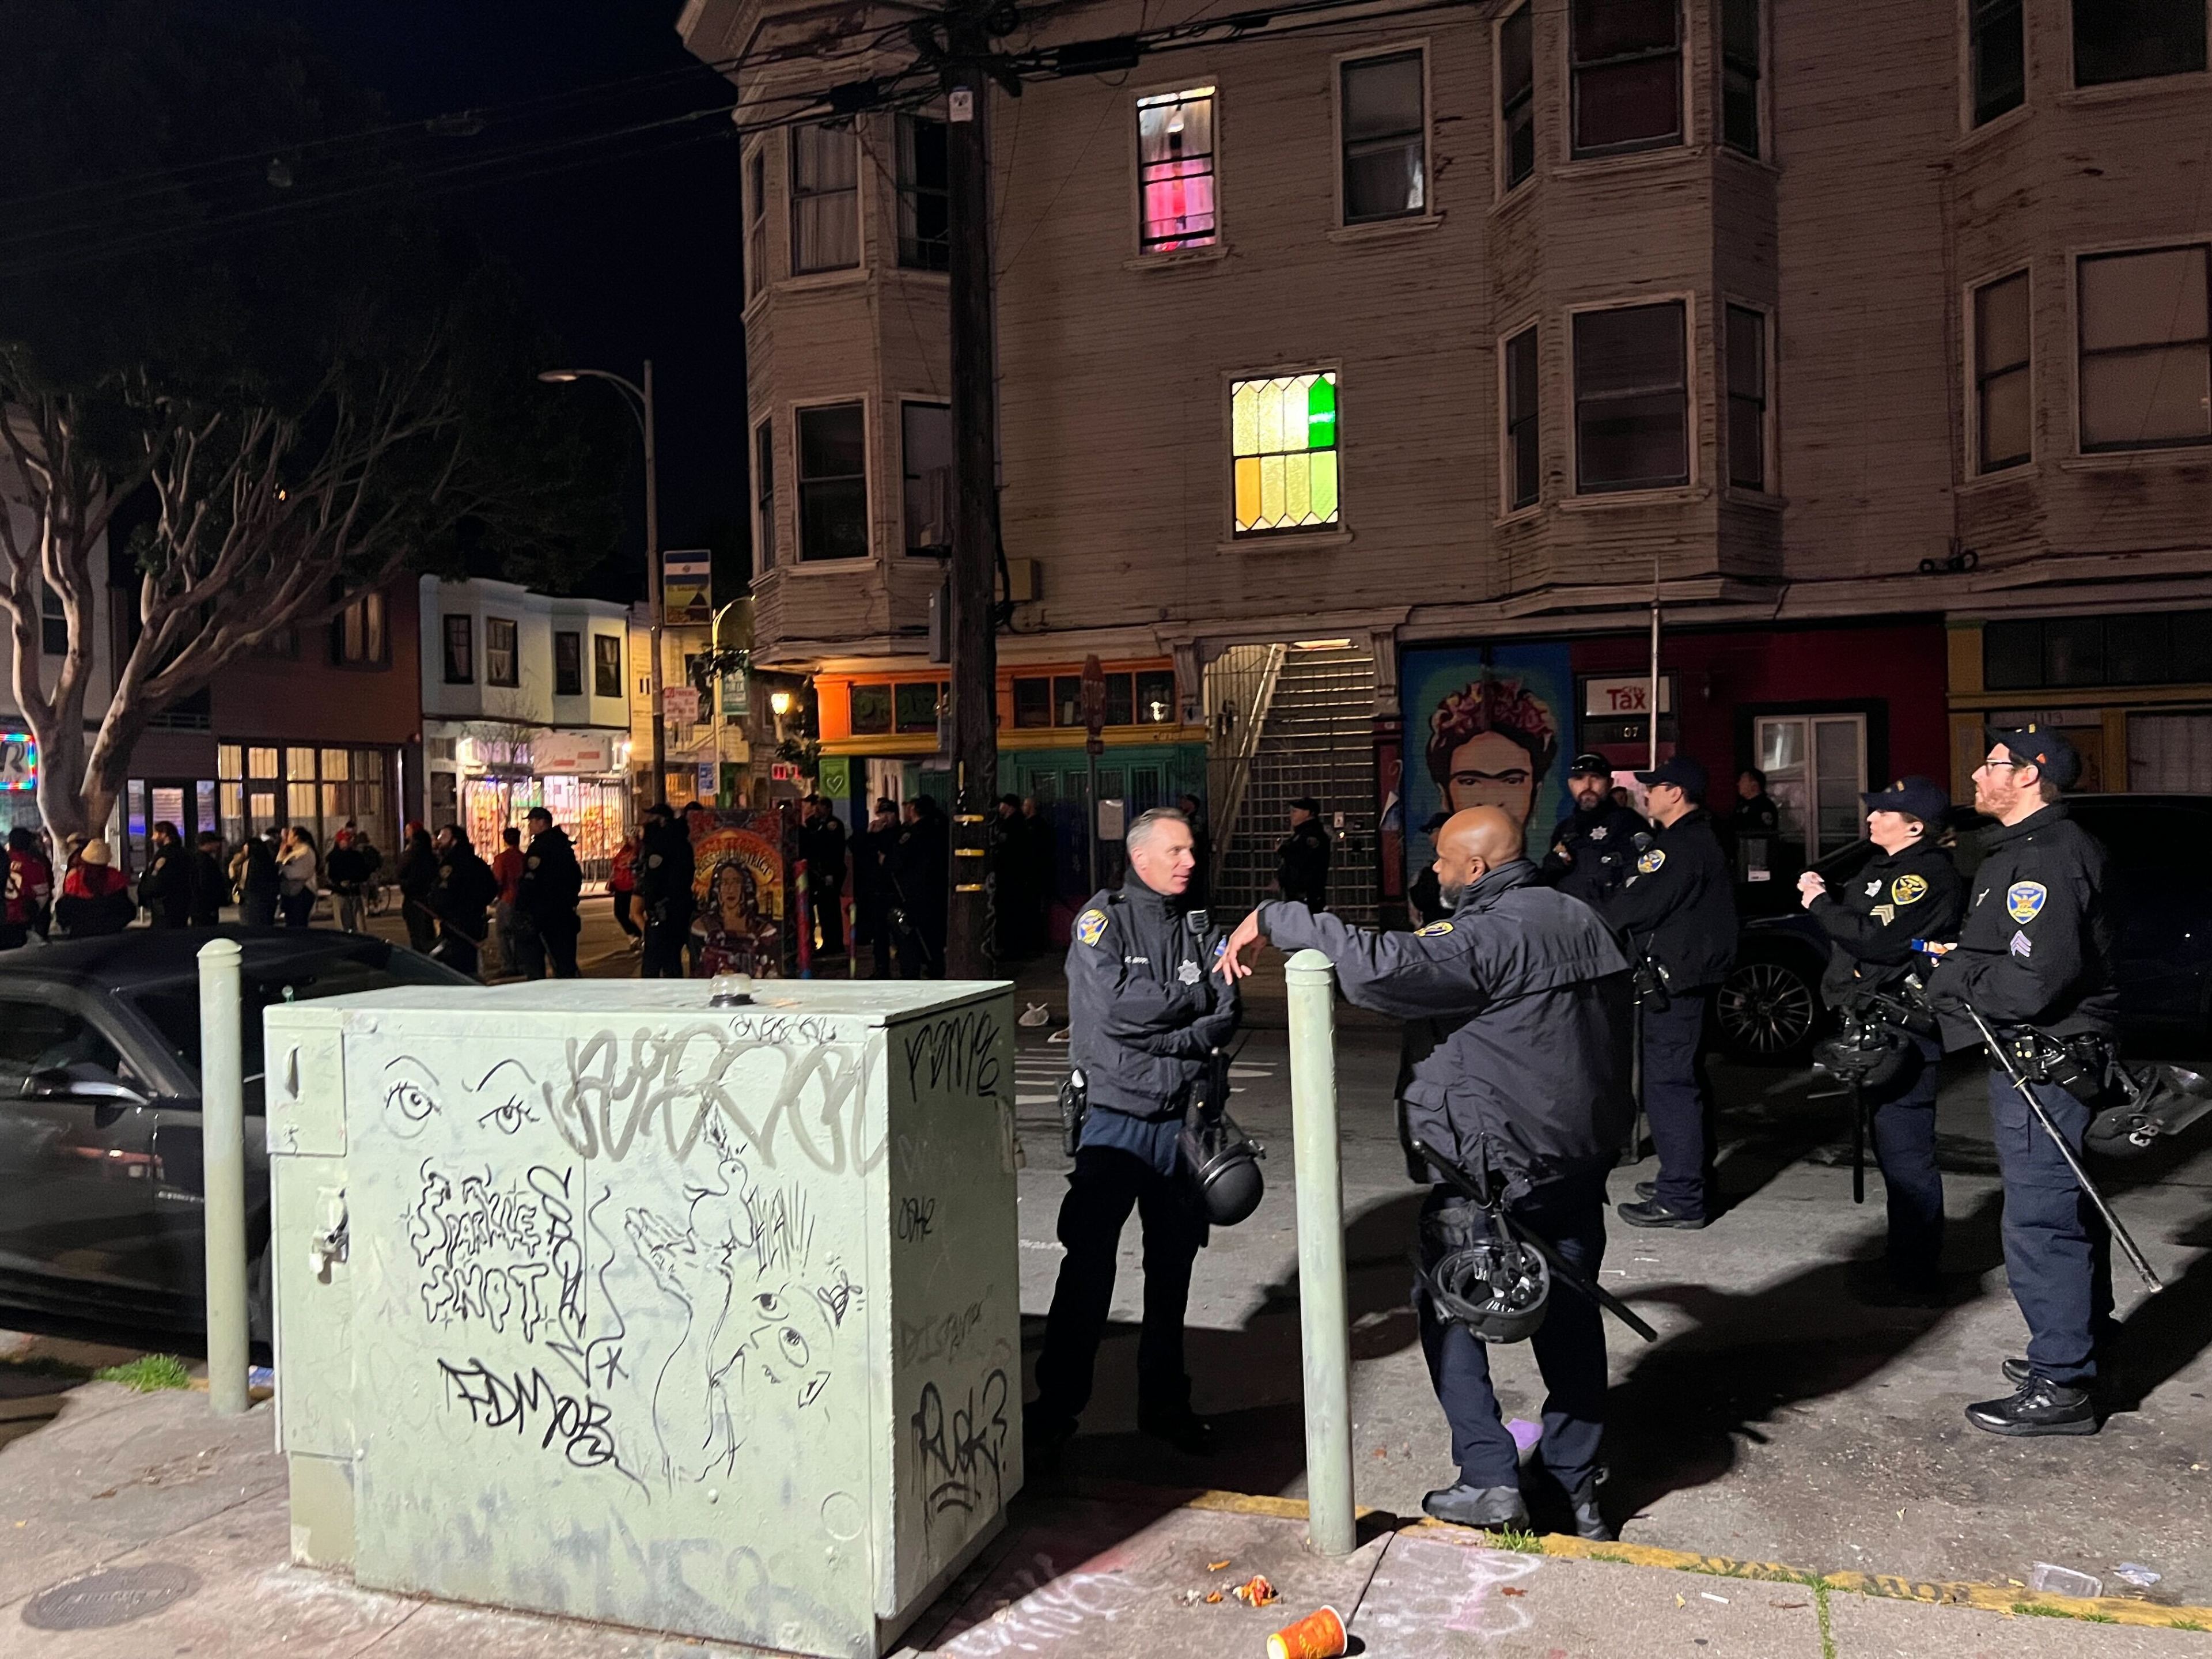 Police officers are standing by a graffiti-covered utility box at night, with onlookers and city buildings in the background.